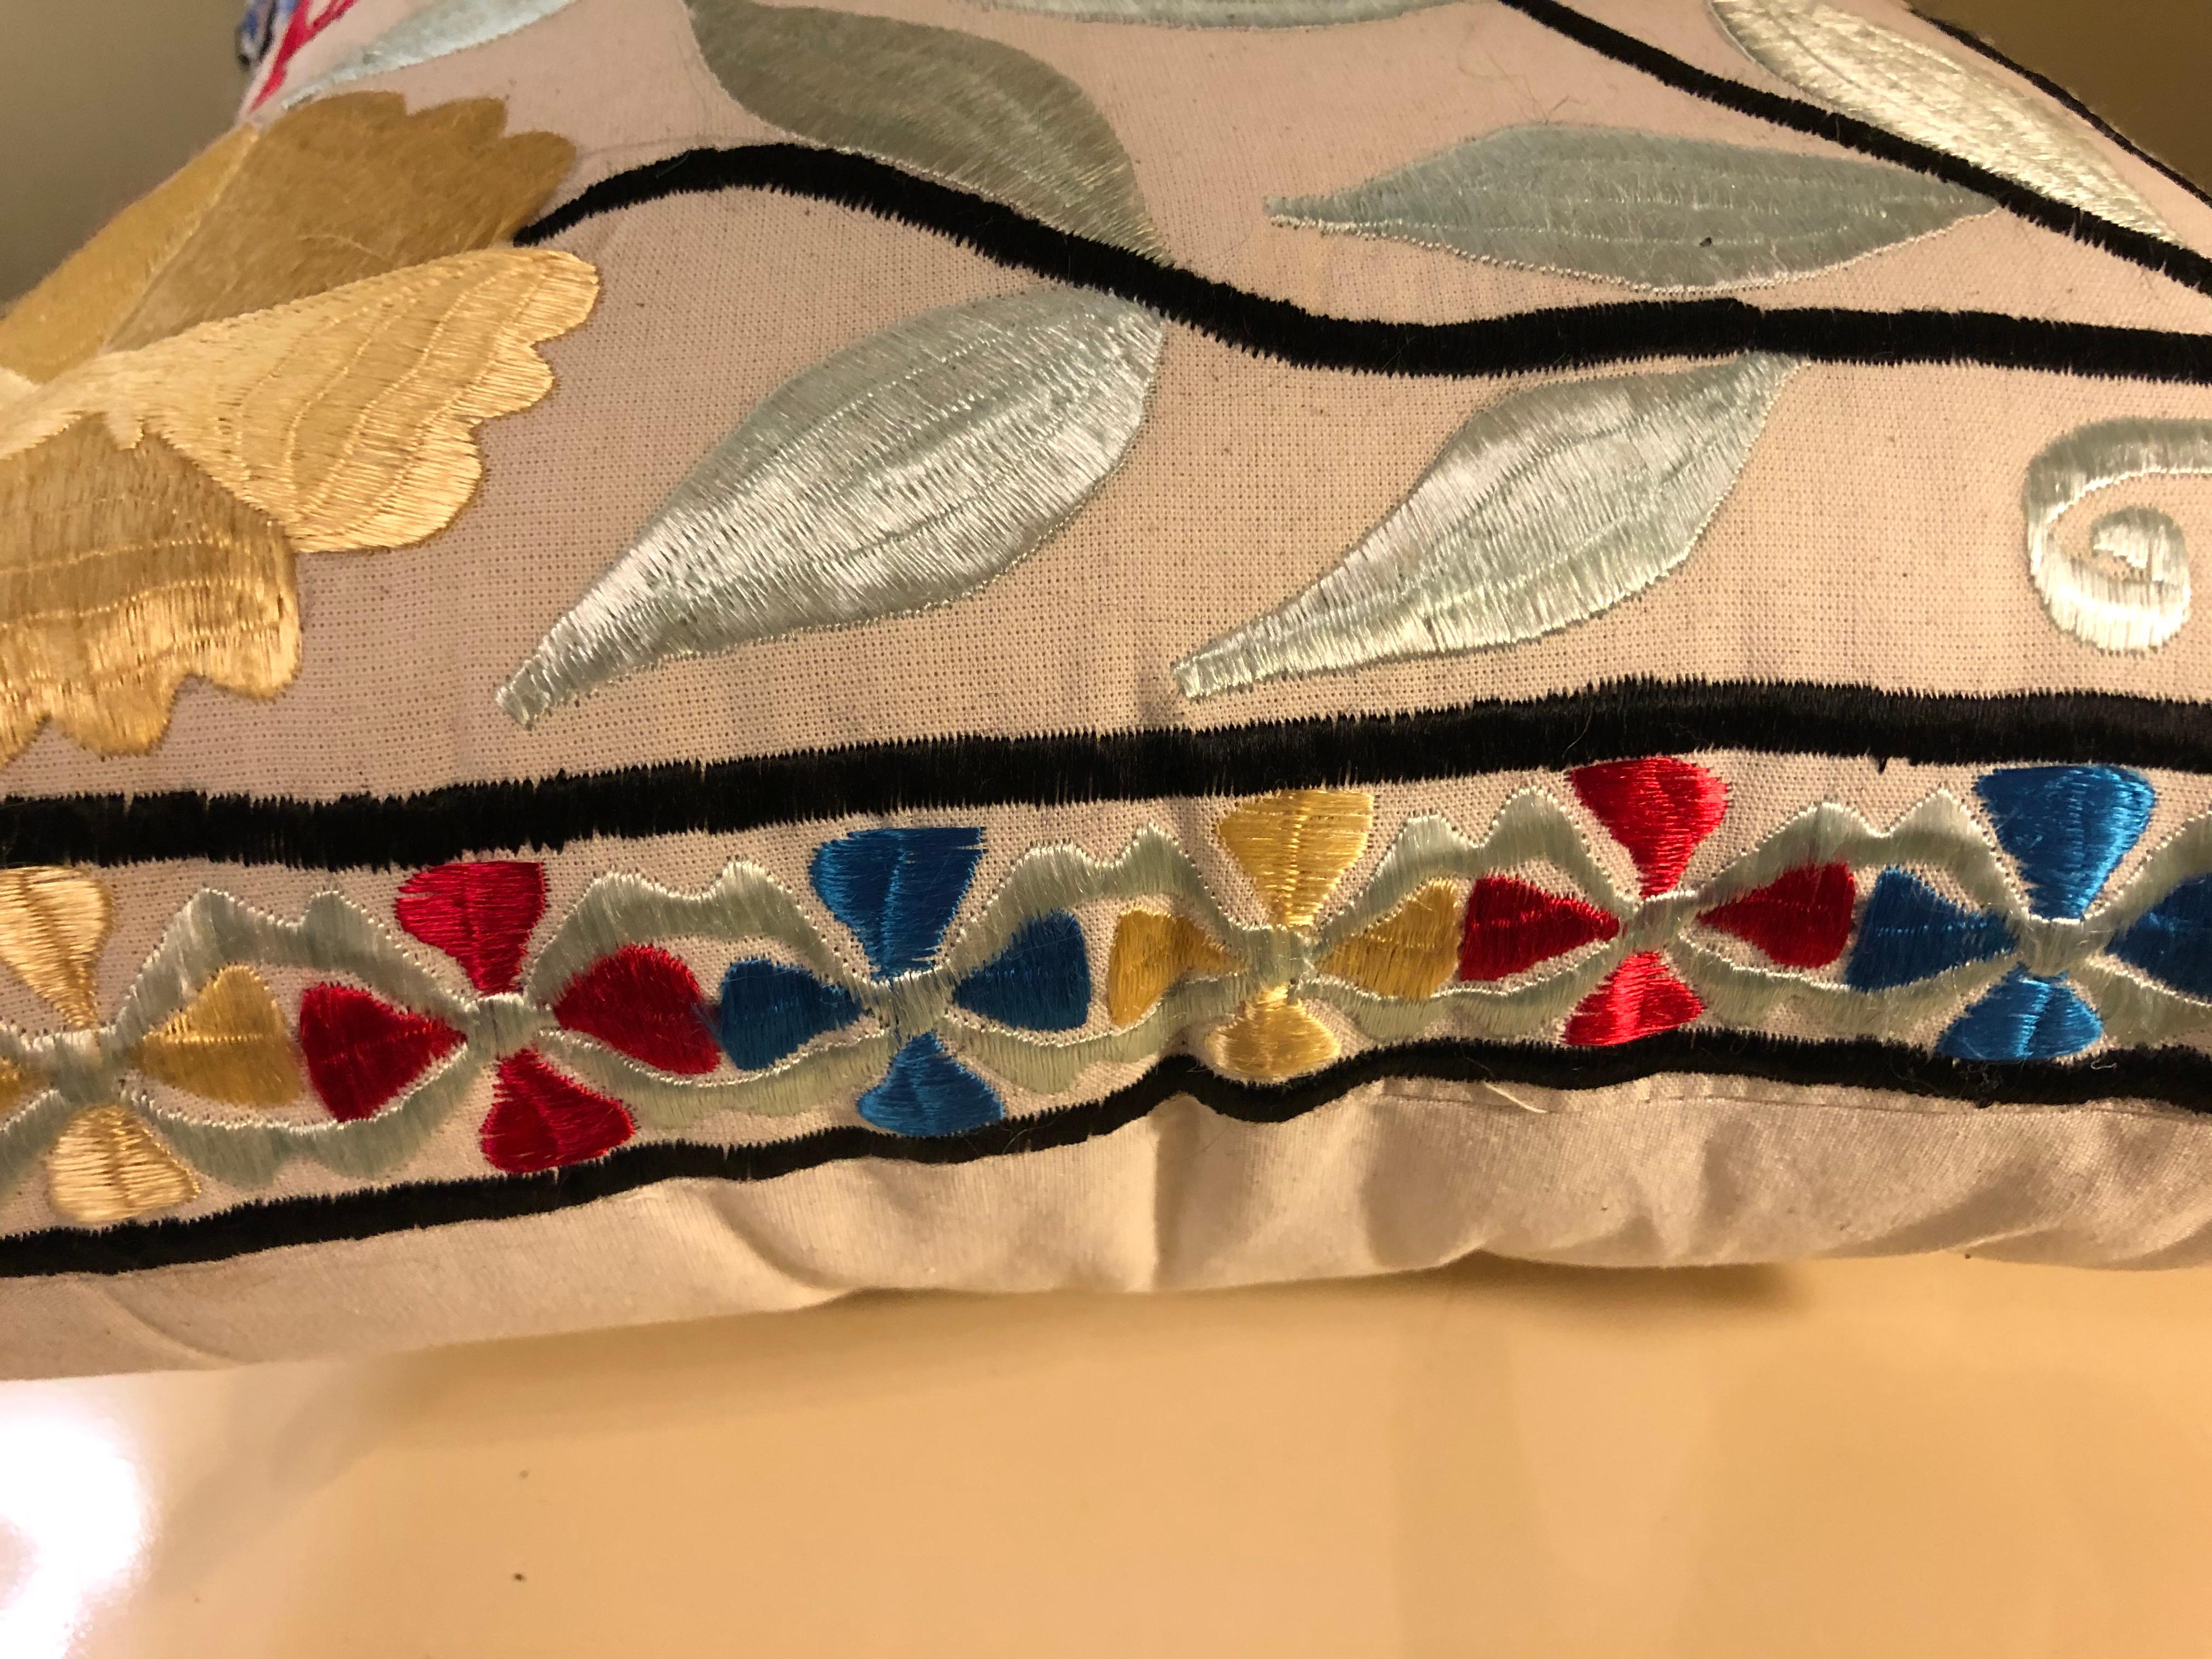 Pair of Moroccan handmade embroidered pillows

The pillows are exquisitely hand-embroidered in vivid colors on off-white featuring red, blue and yellow flowers.